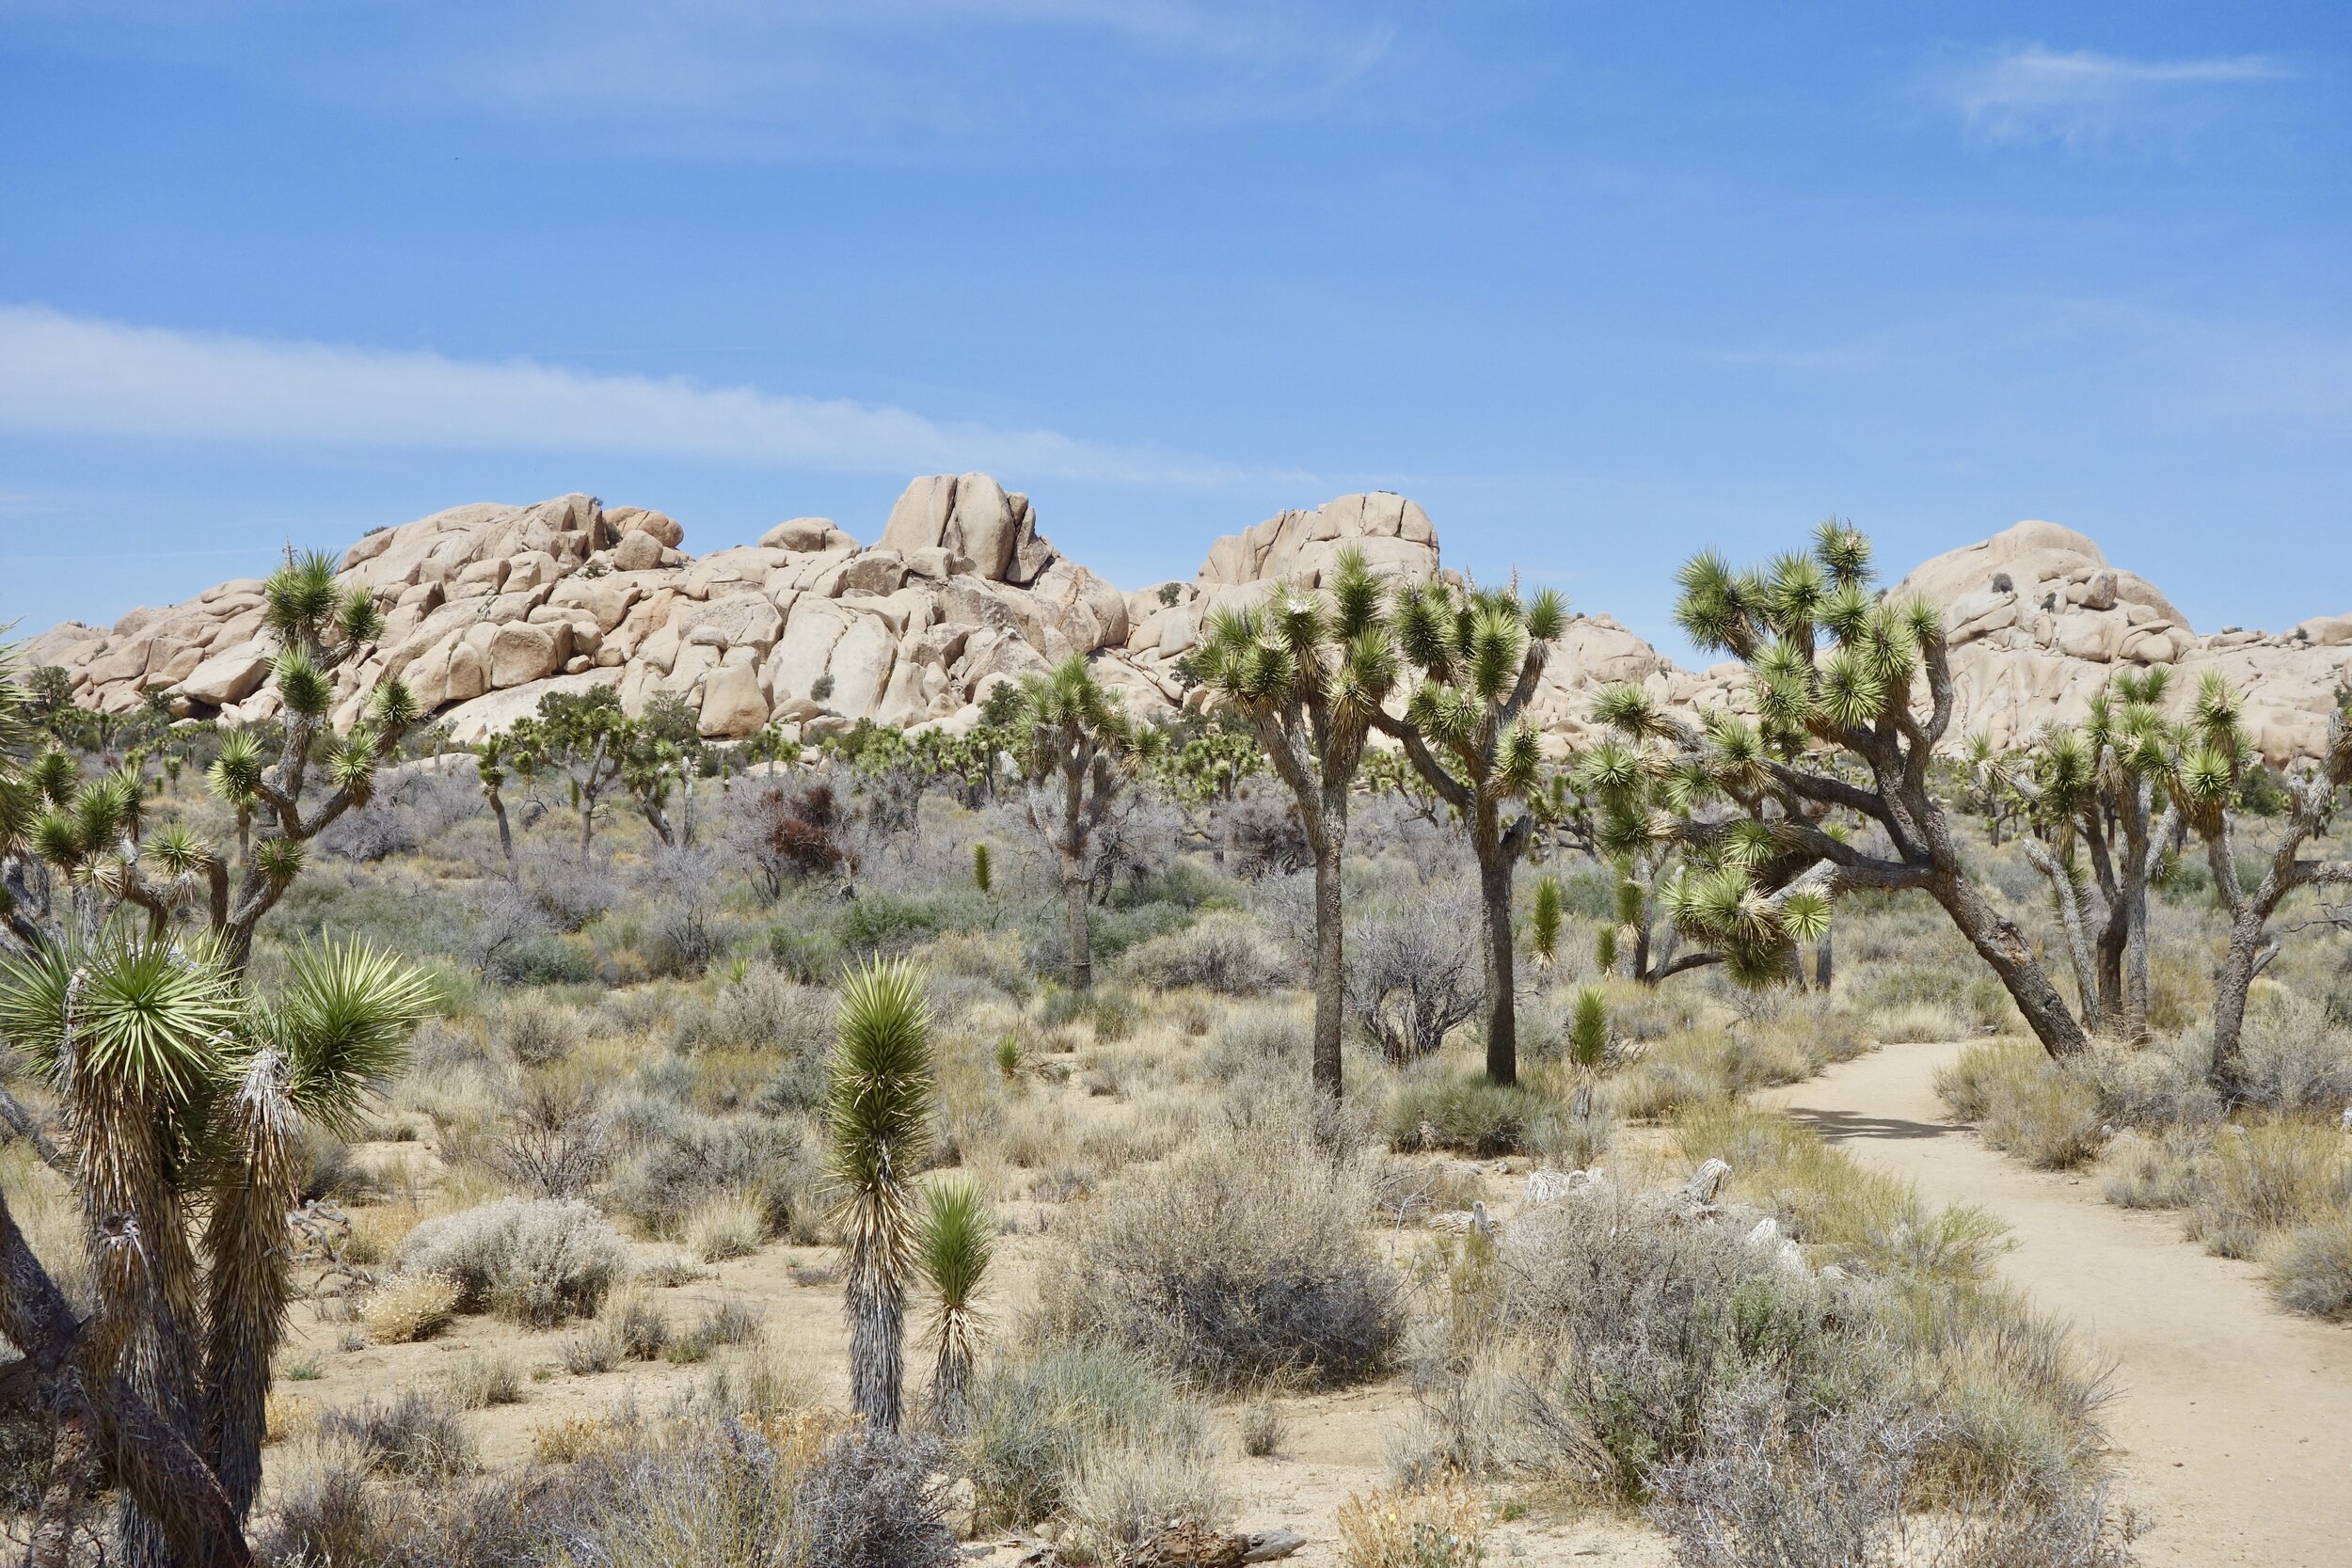 THE PARK’S NAMESAKE JOSHUA TREES ARE FOUND IN GREAT FORESTs IN THE MOJAVE DESERT SEGMENT OF THE PARK.